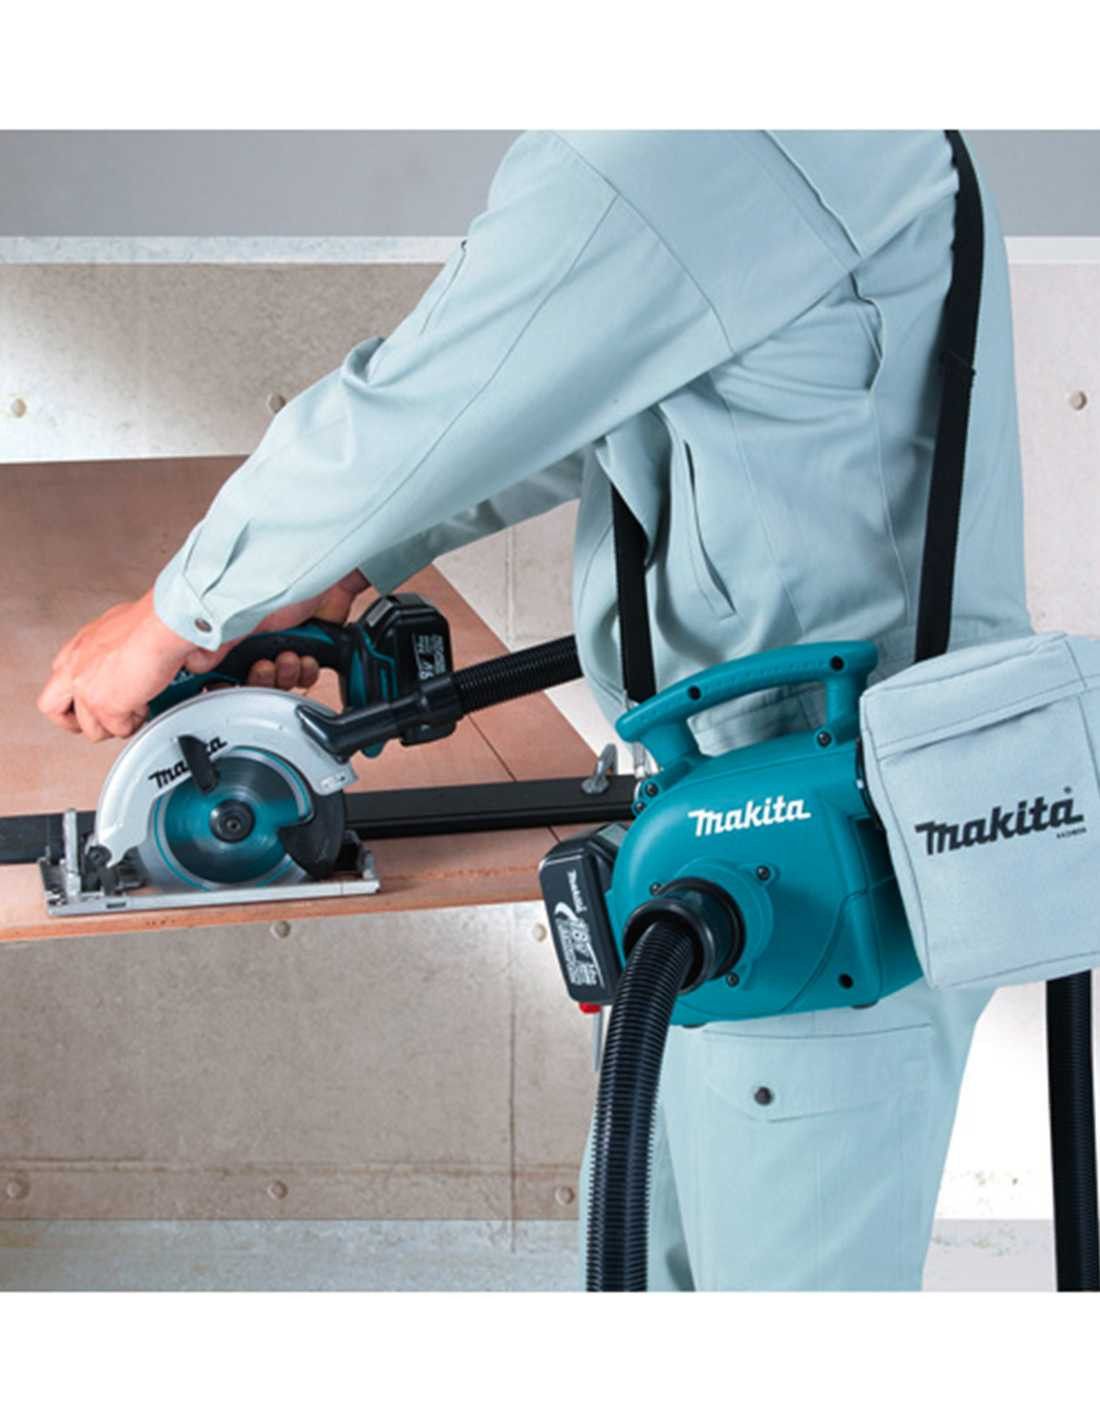 Makita kit with 11 tools + 3 bat + charger + 2 bags DLX1143BL3